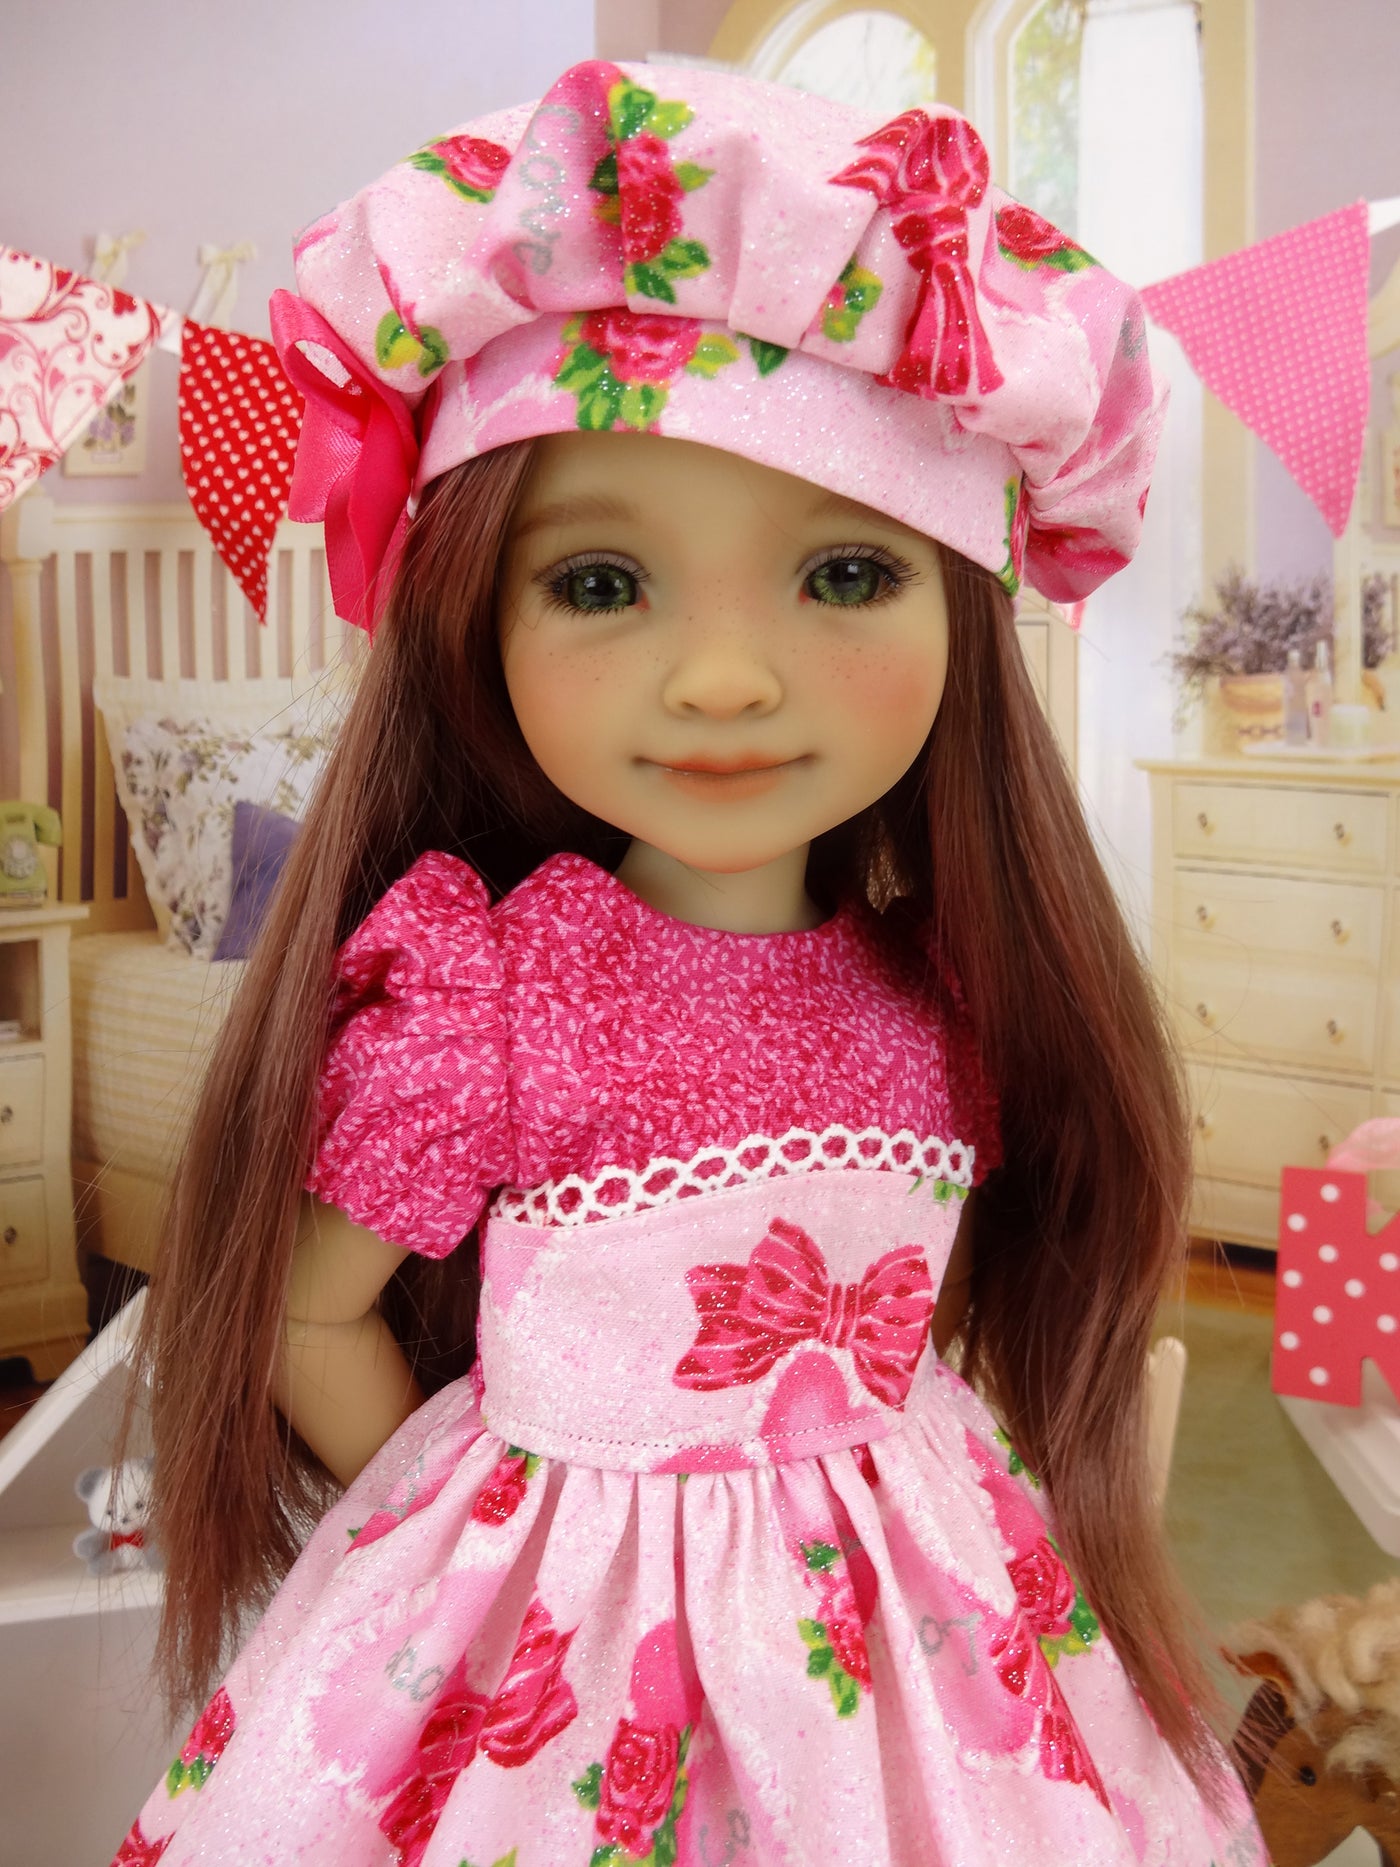 My Love - dress with shoes for Ruby Red Fashion Friends doll